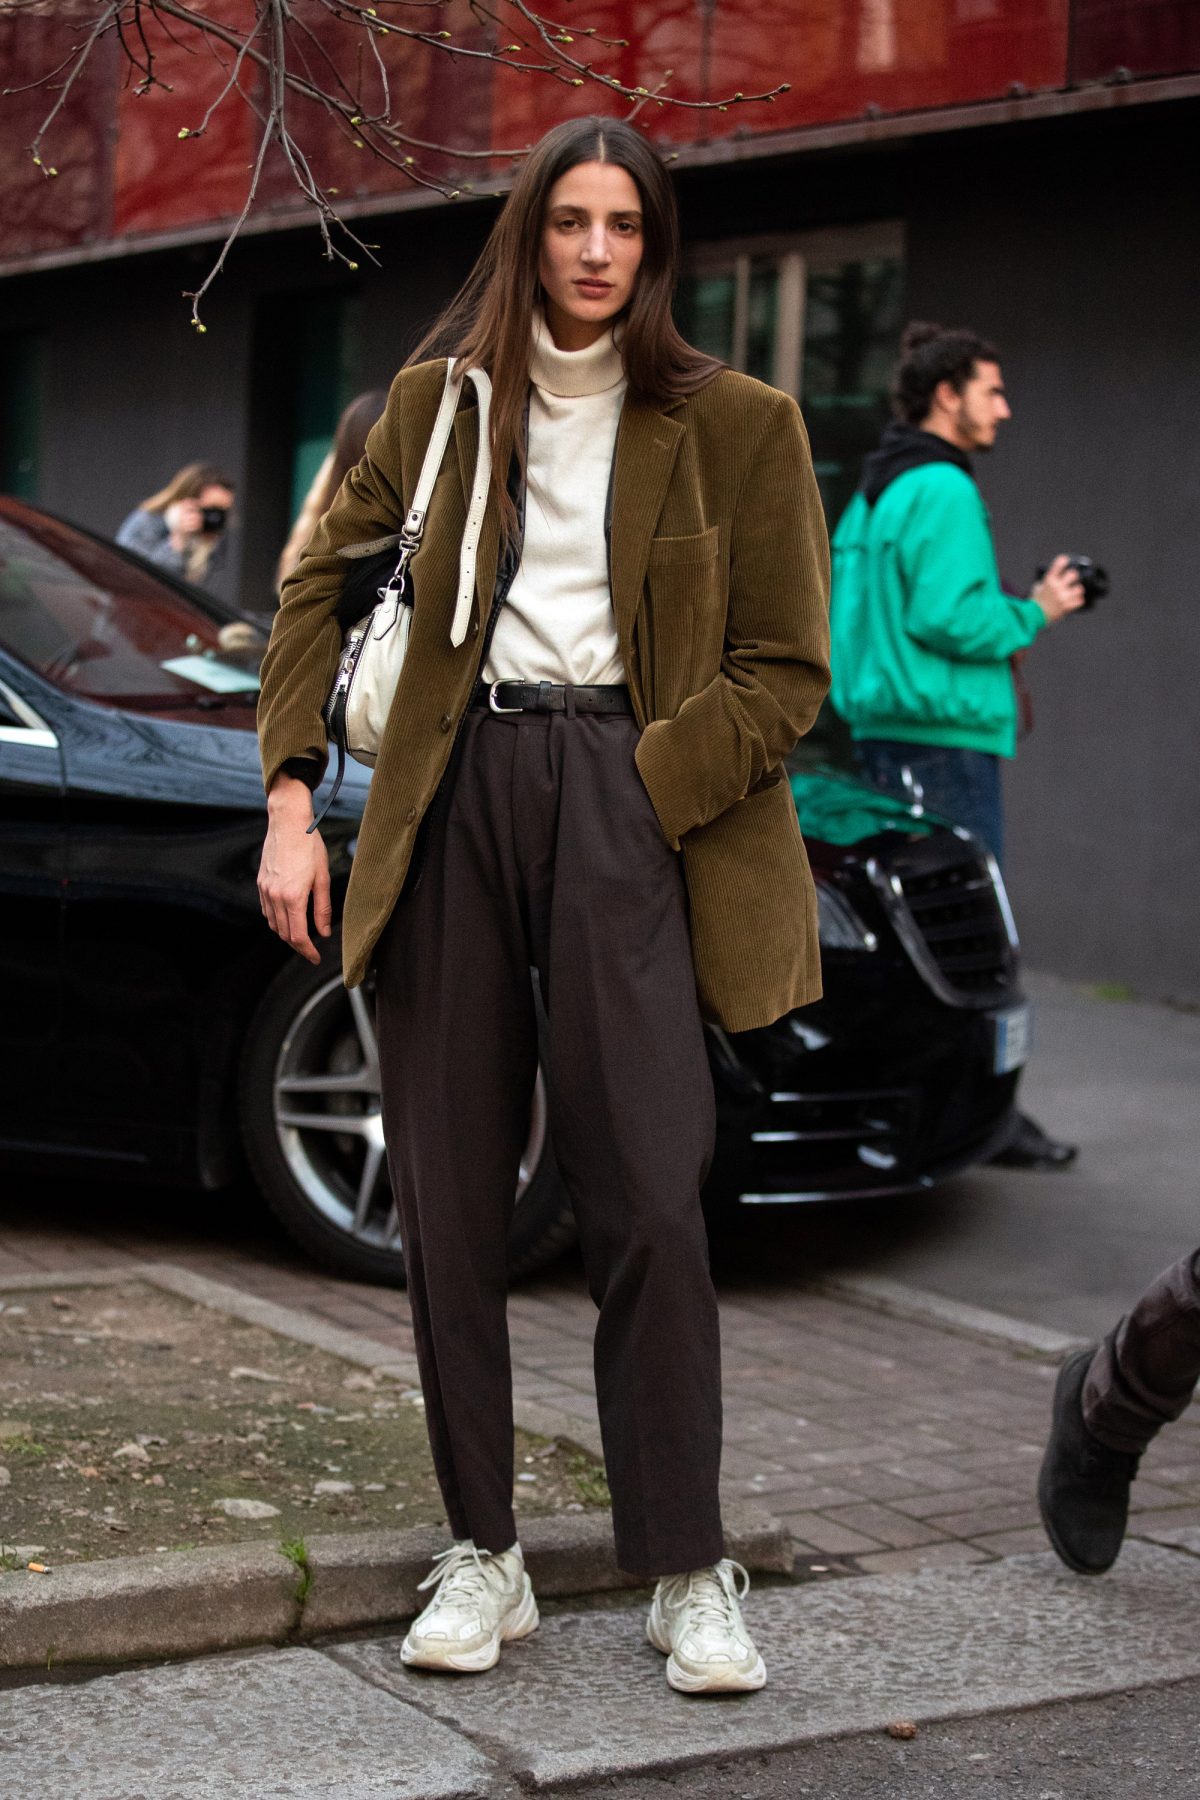 Channel Model-Off-Duty Style With These 4 Key Trends